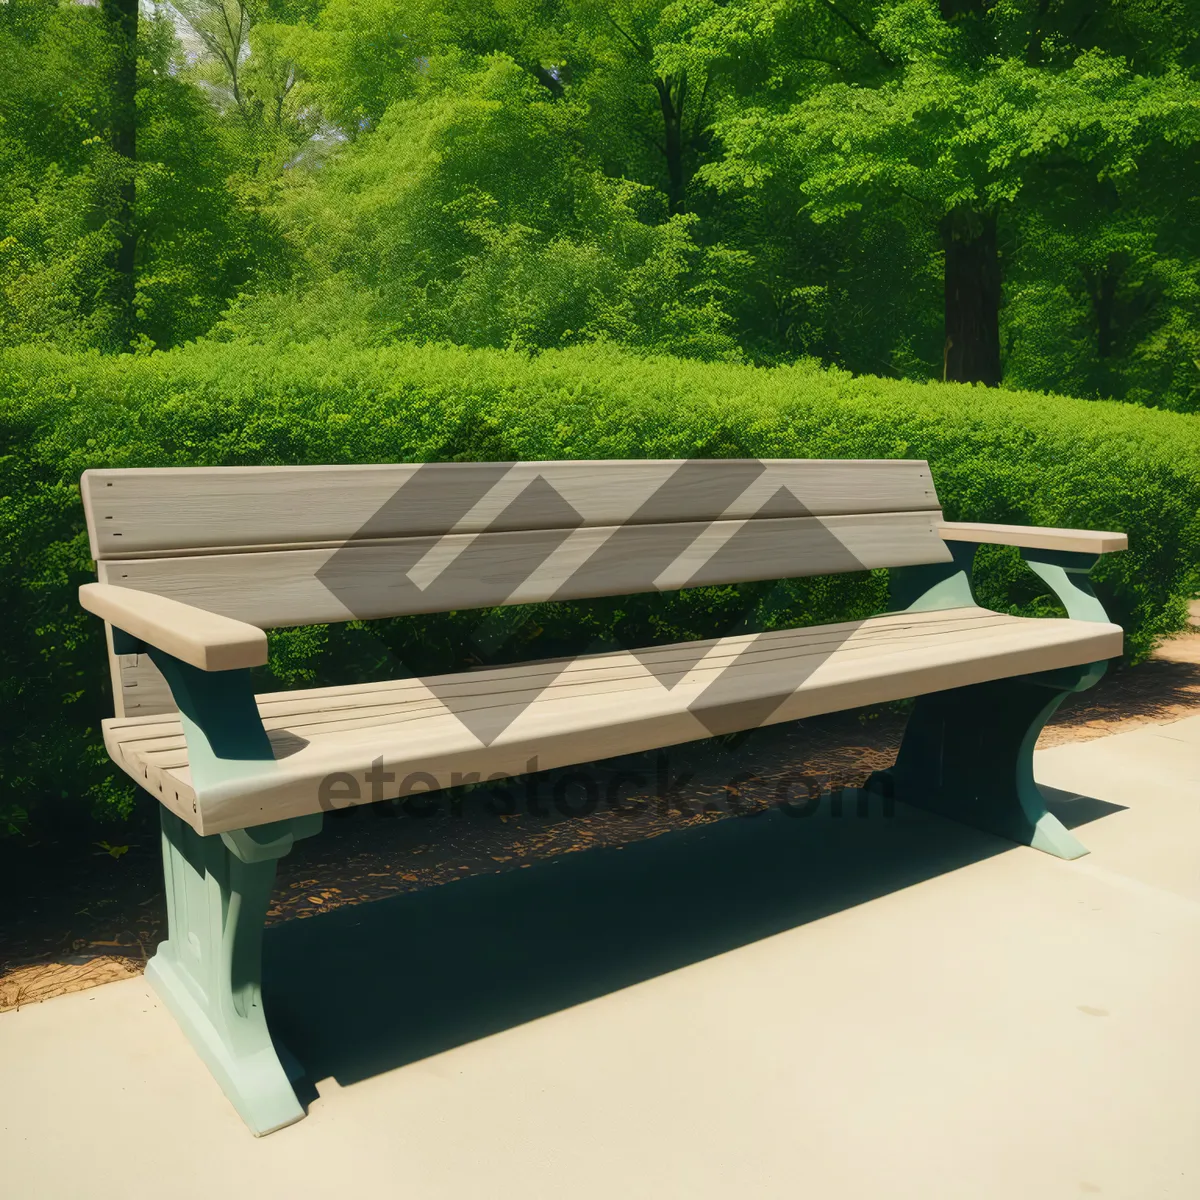 Picture of Wooden Park Bench with Stack of Books